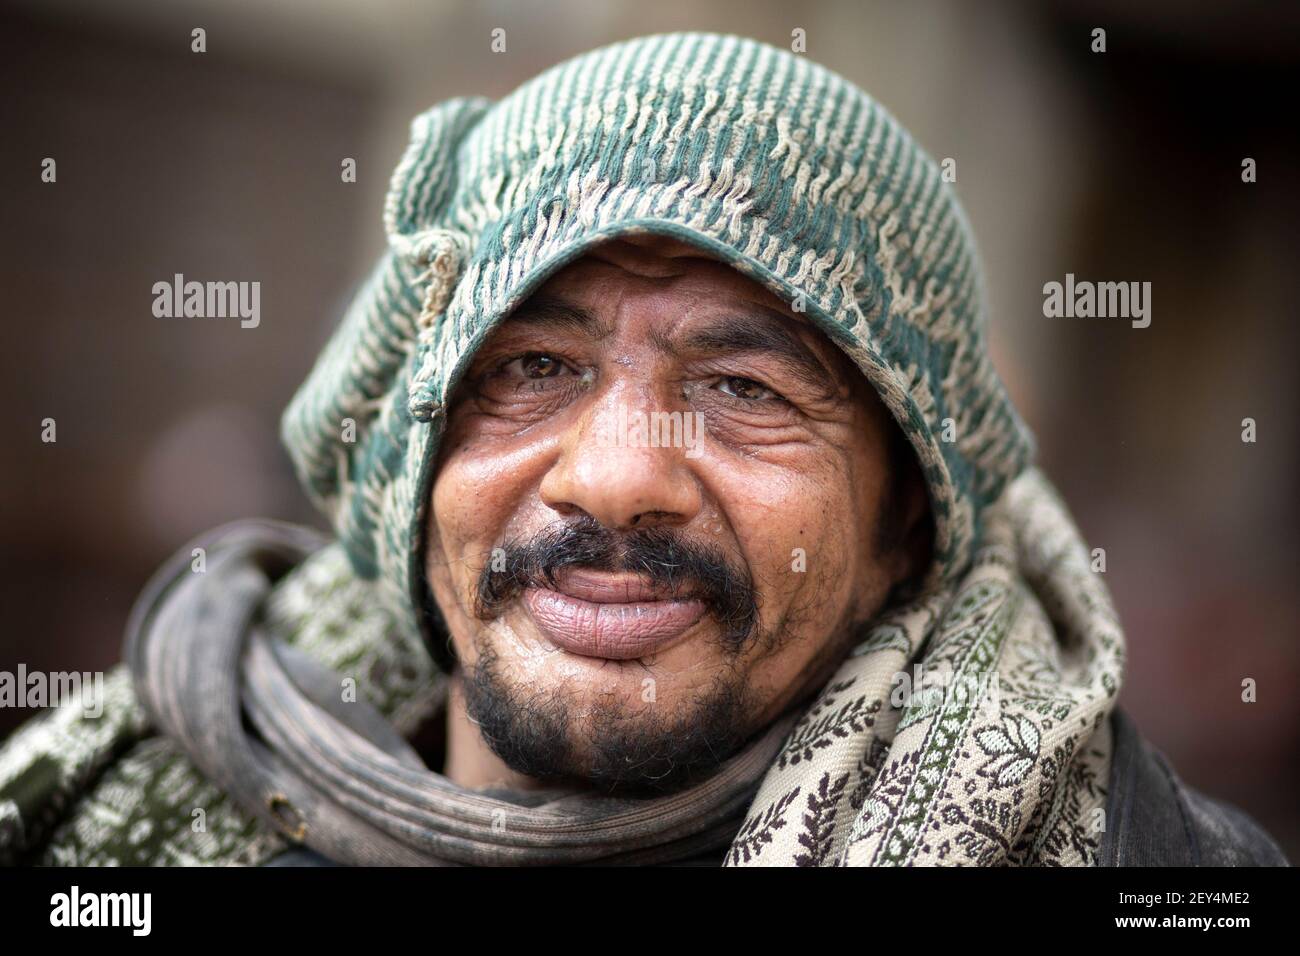 Portrait of a Egyptian man wearing a headscraf in the Islamic Quarter of Cairo, Egypt Stock Photo